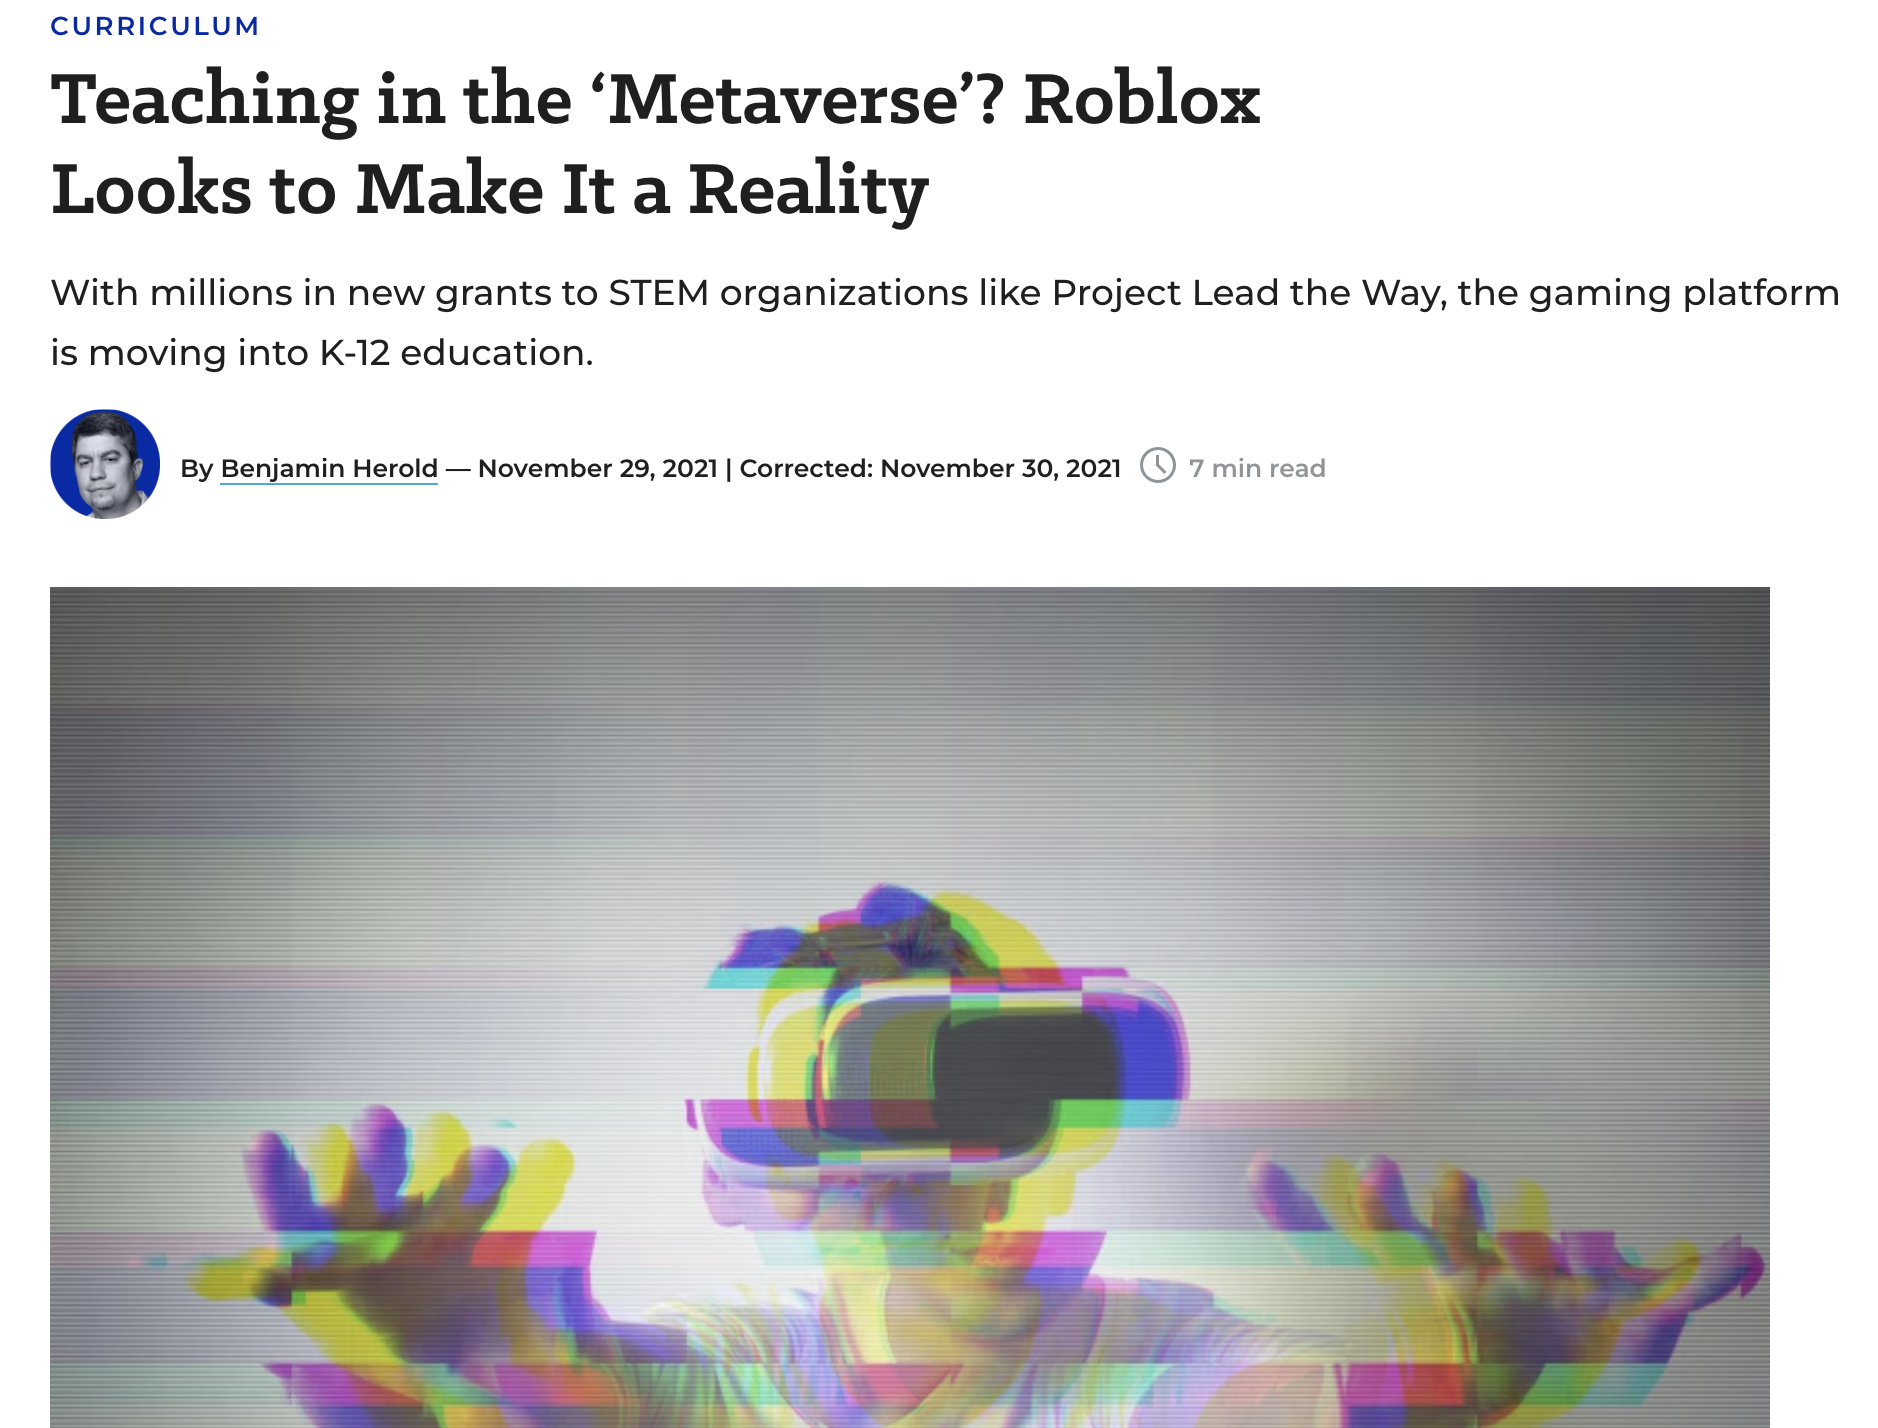 Article titled: Teaching in the Metaverse? Roblox Looks to Make It a Reality